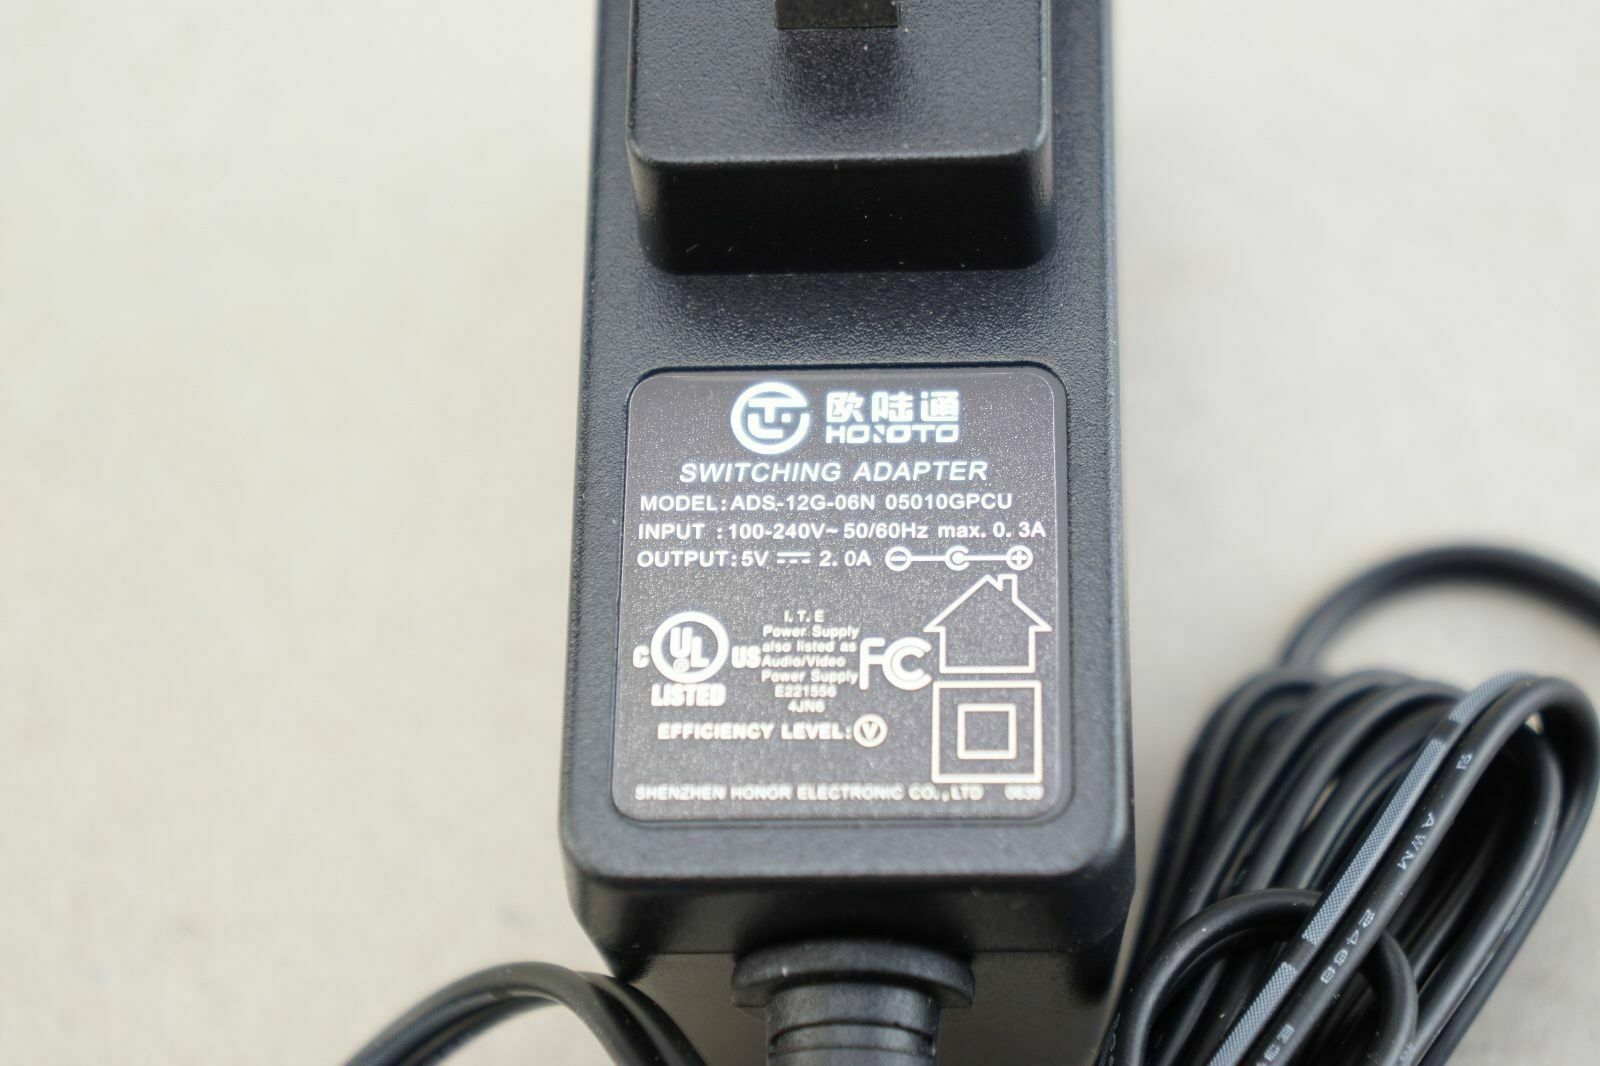 New Honor ADS-12G-06 05010GPCU AC DC Power Supply 5V 2A Adapter Charger